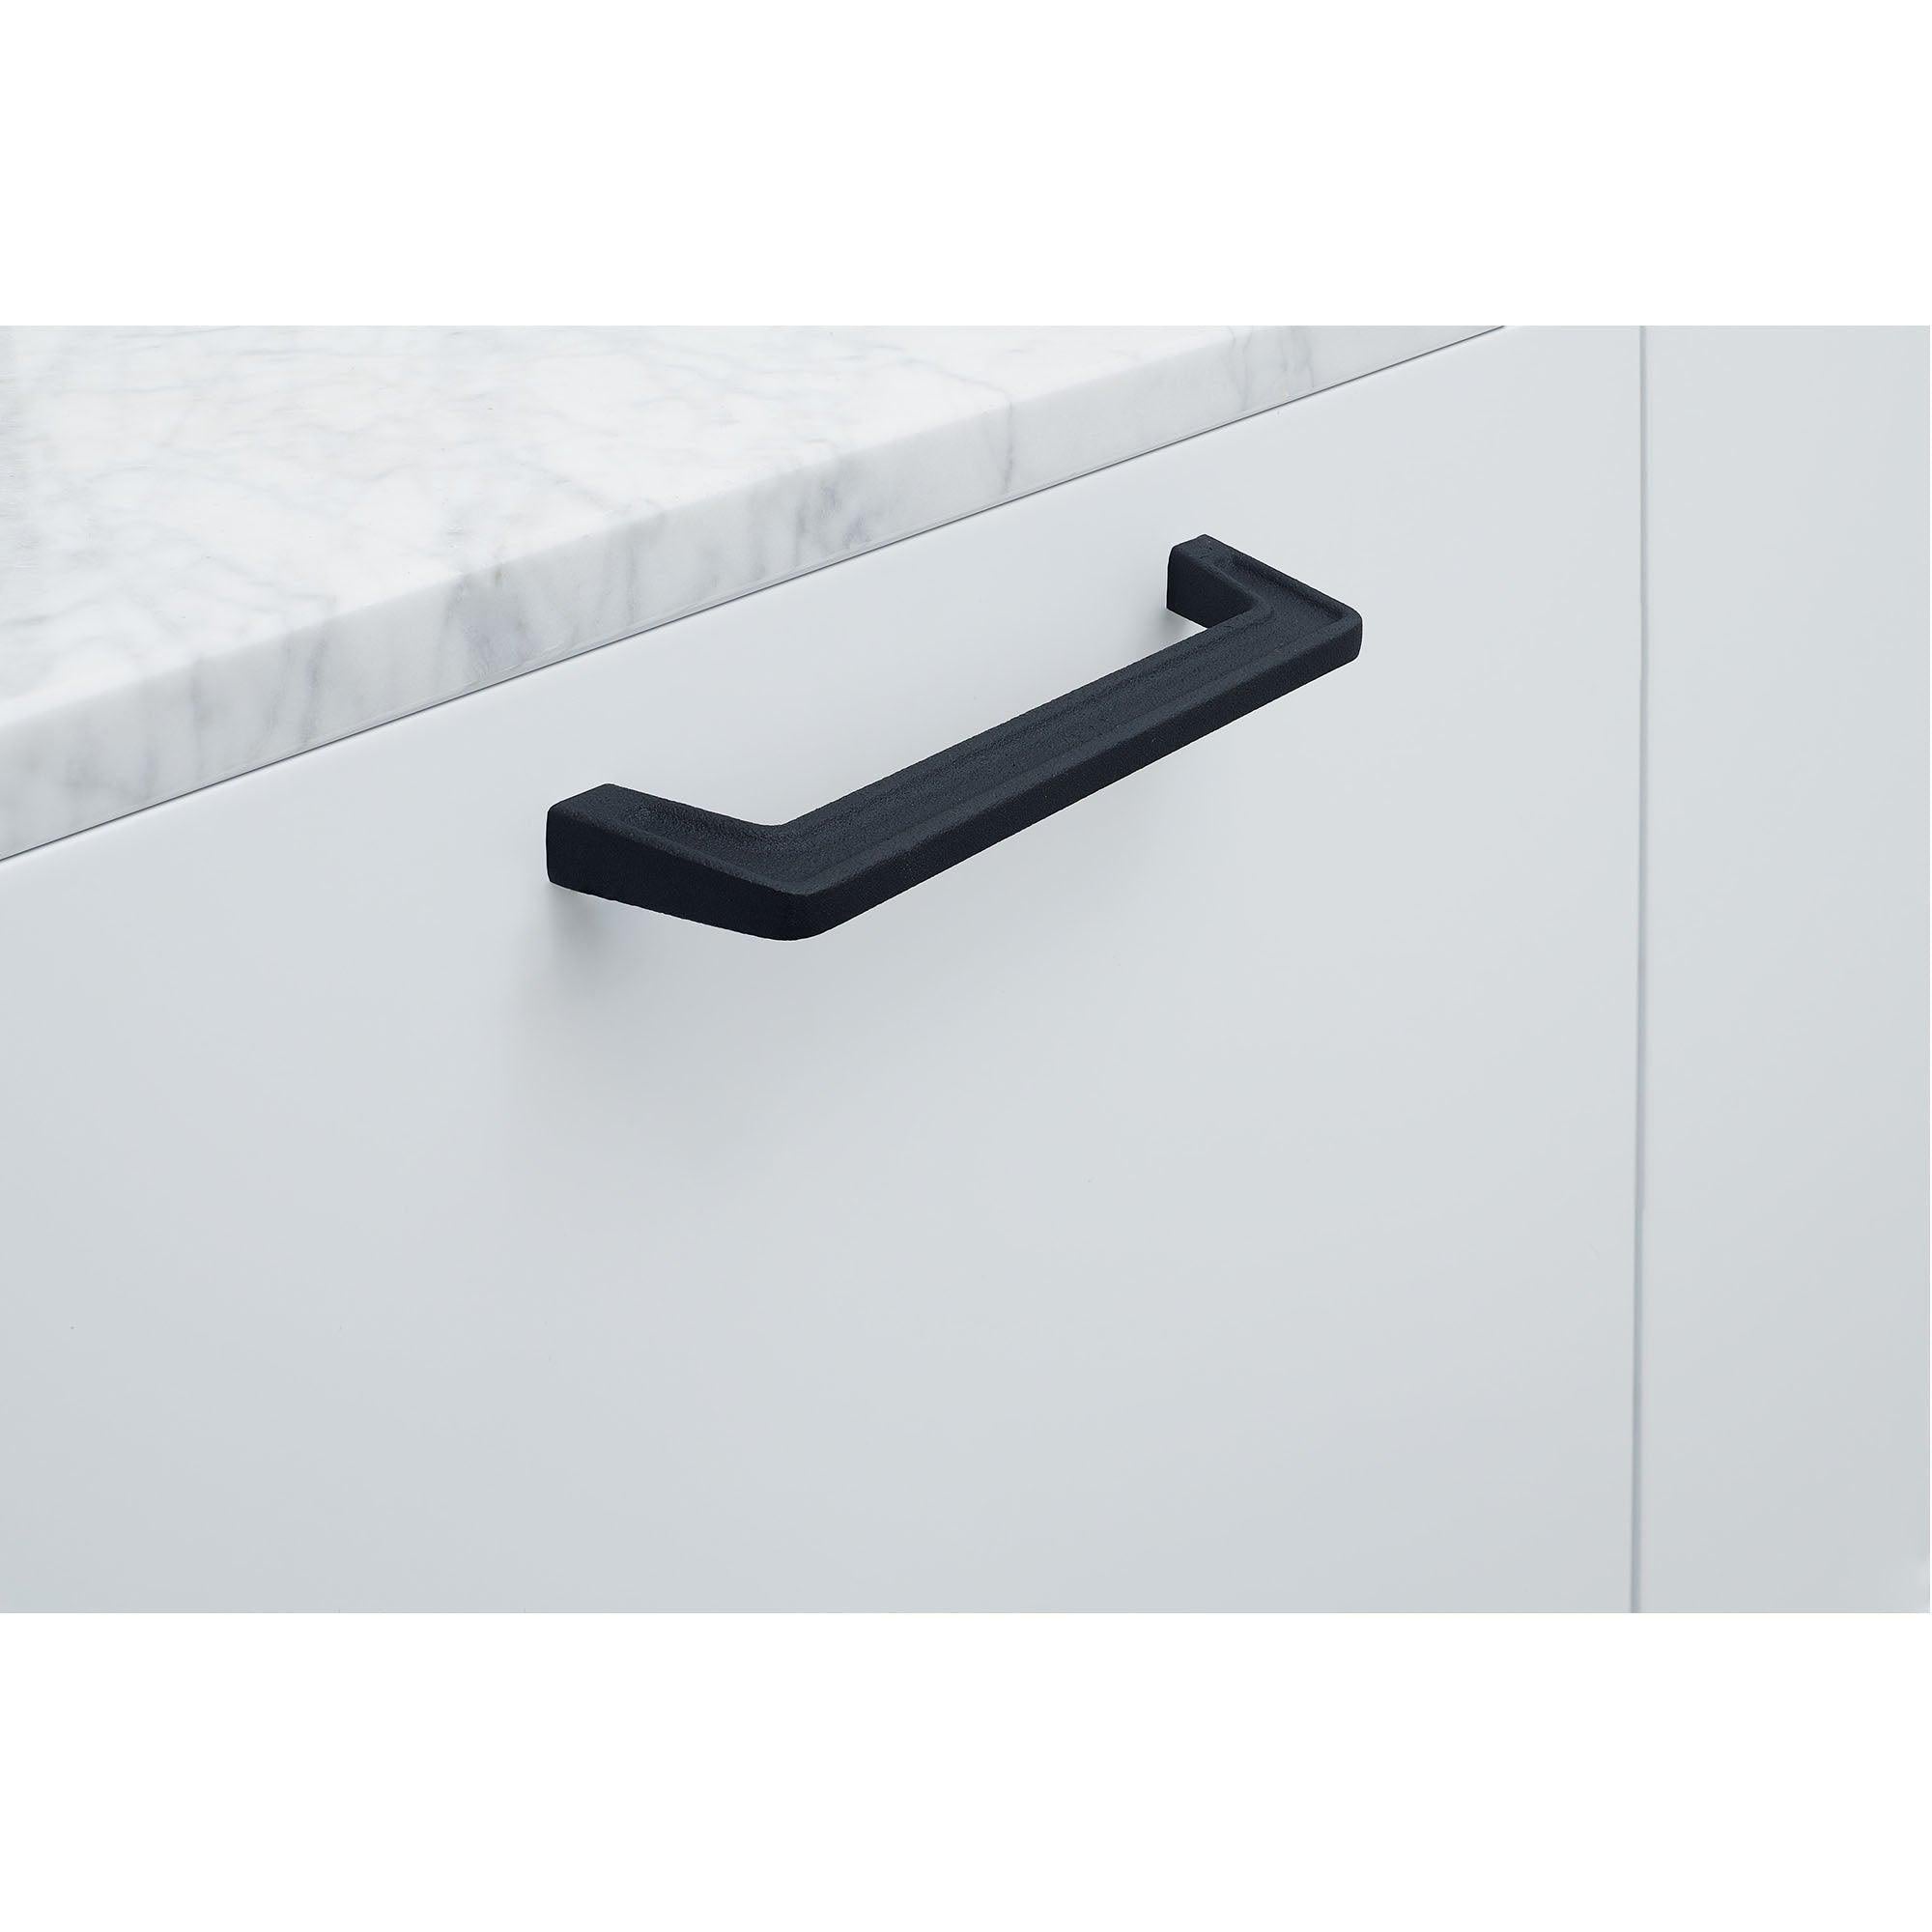 Handle Pagoda, Cast iron black, available in different sizes (44/173mm) - Scandi Handles